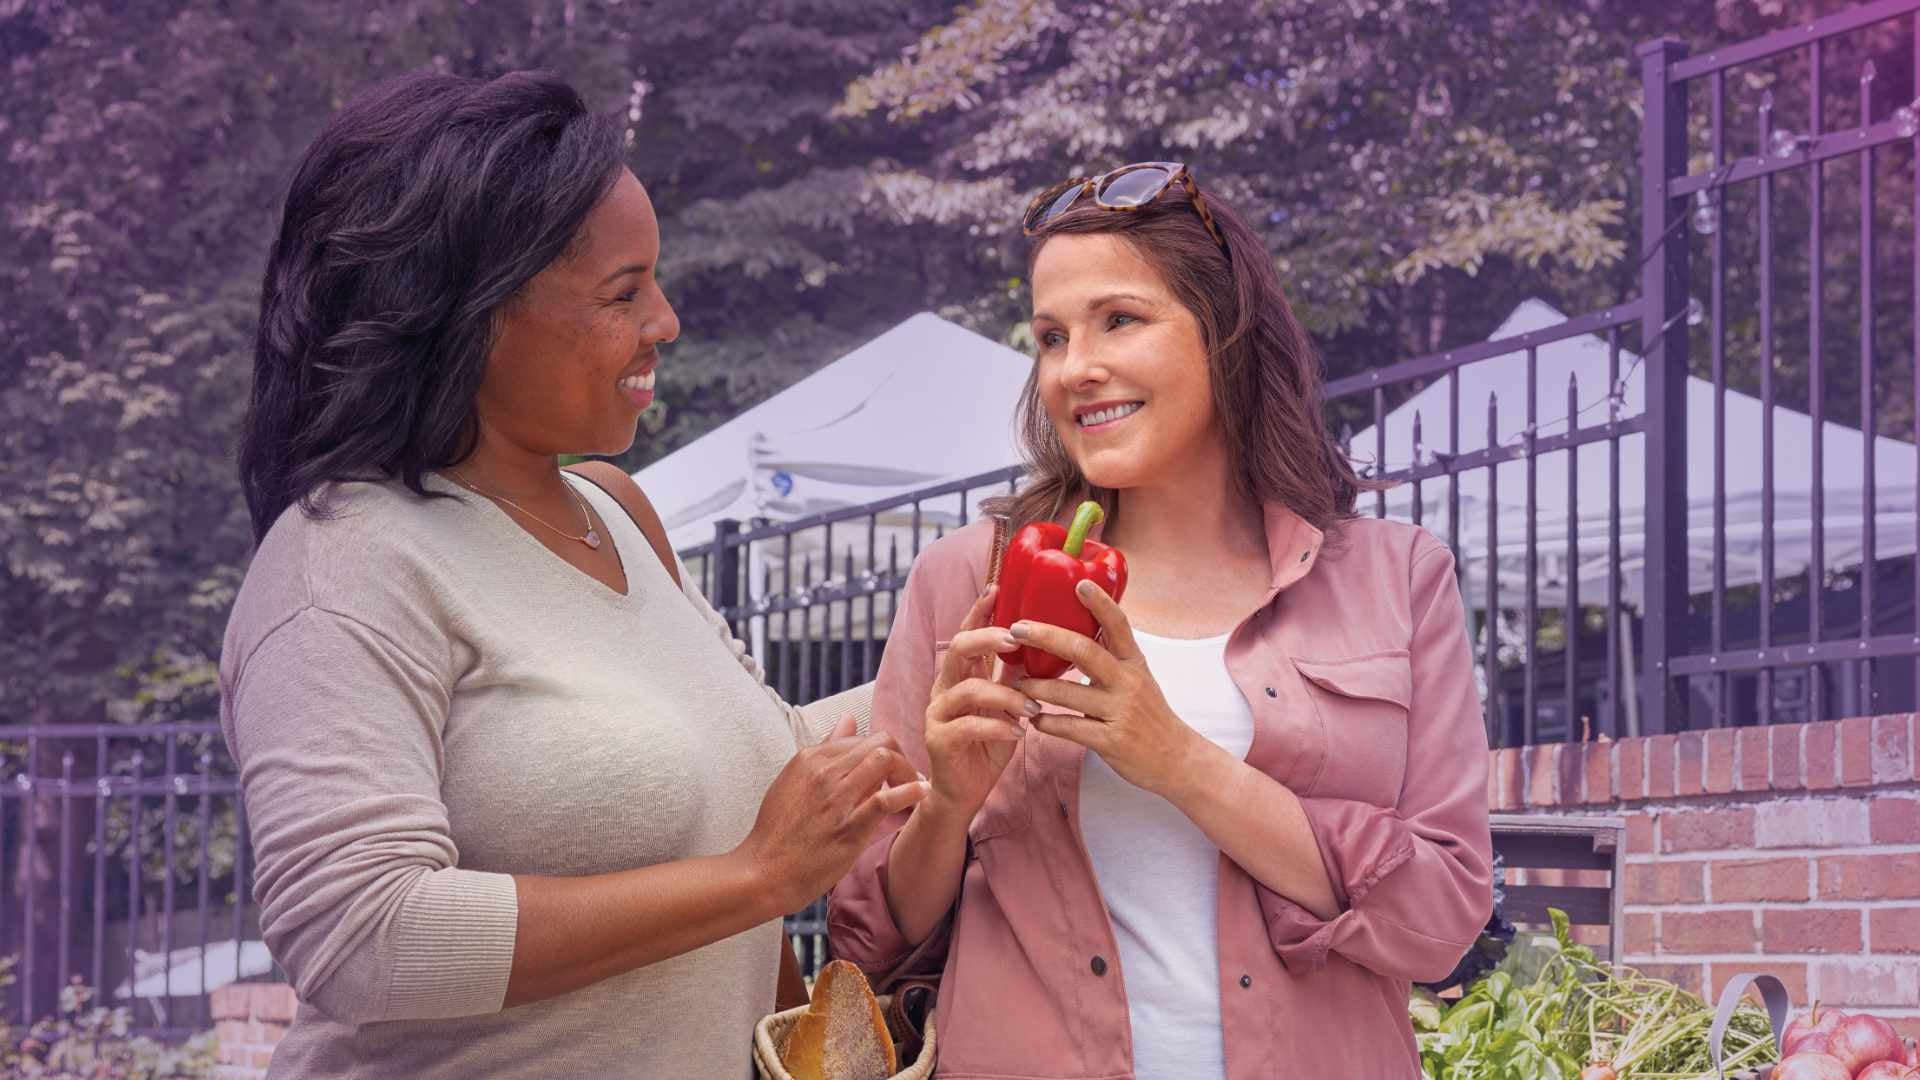 Photo of two women with one holding a chili pepper